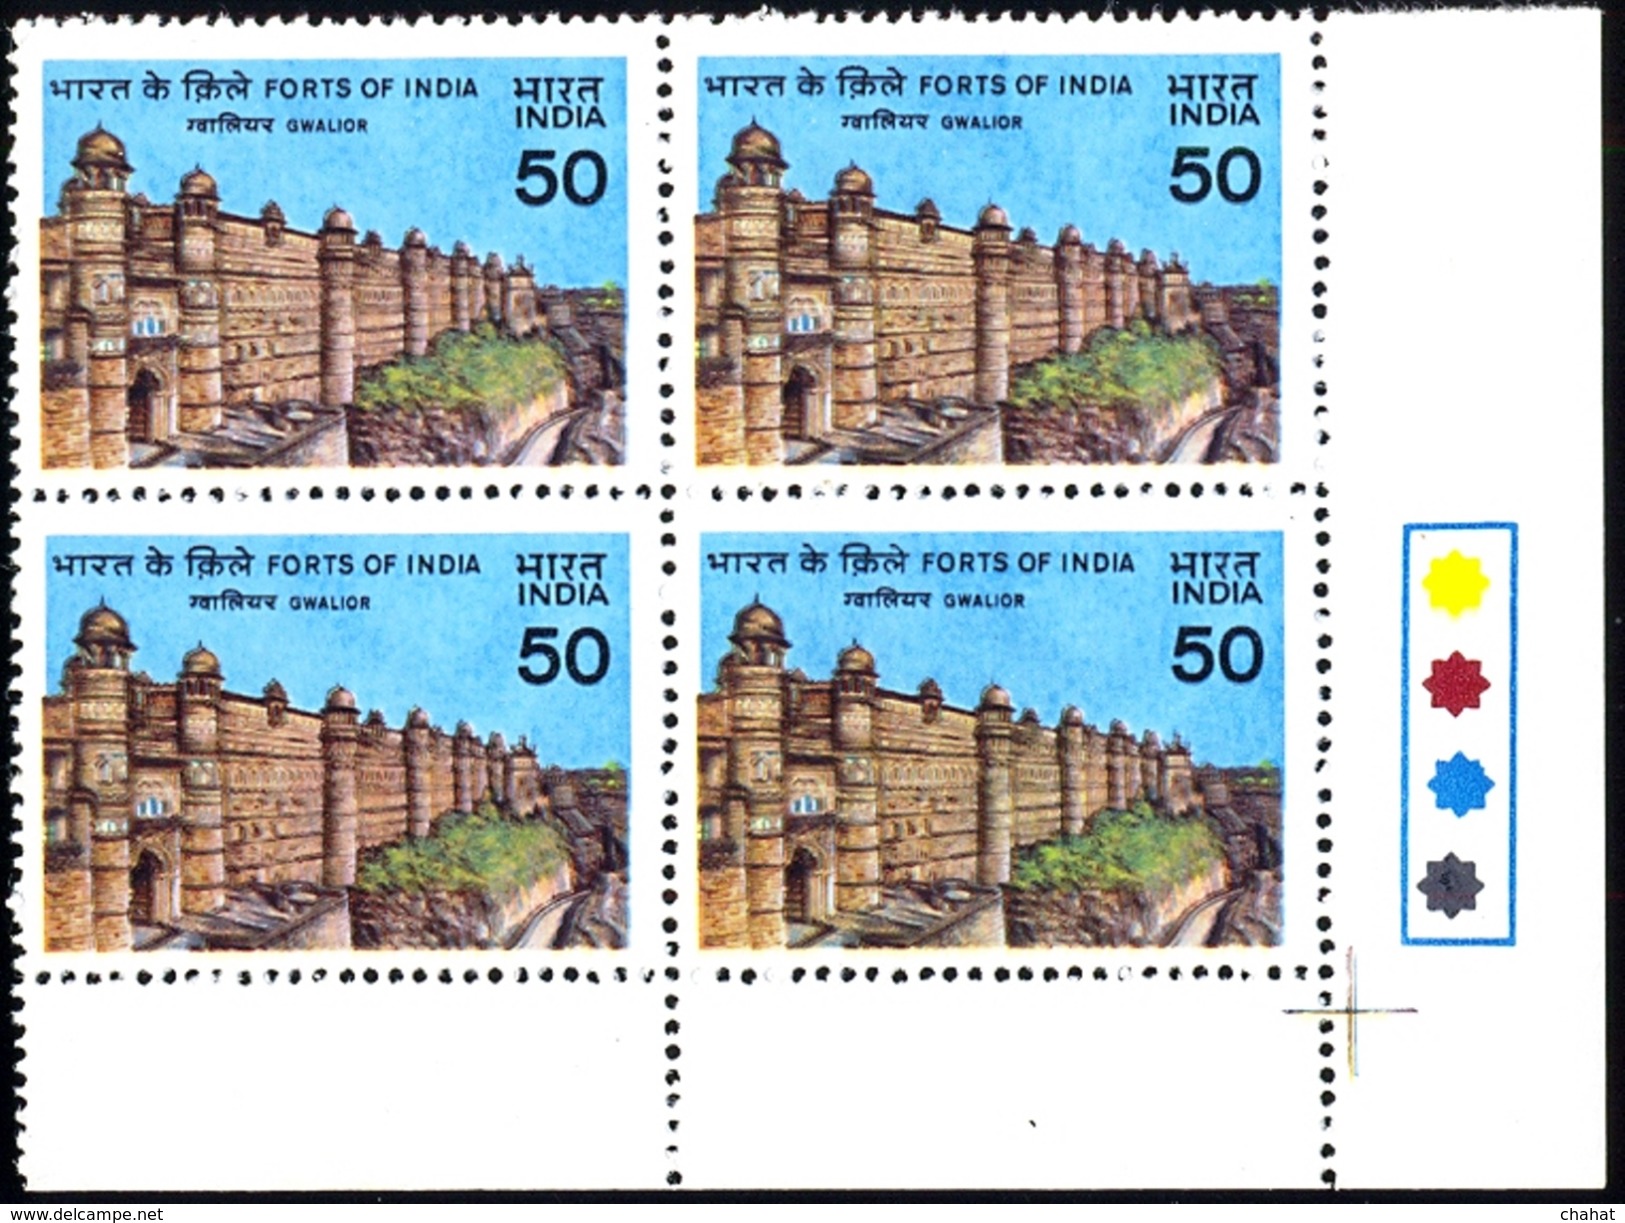 ERROR-FORTS-GWALIOR FORT-CORNER BLOCK OF FOUR WITH TRAFFIC LIGHTS-INDIA-MNH-H1-06 - Errors, Freaks & Oddities (EFO)